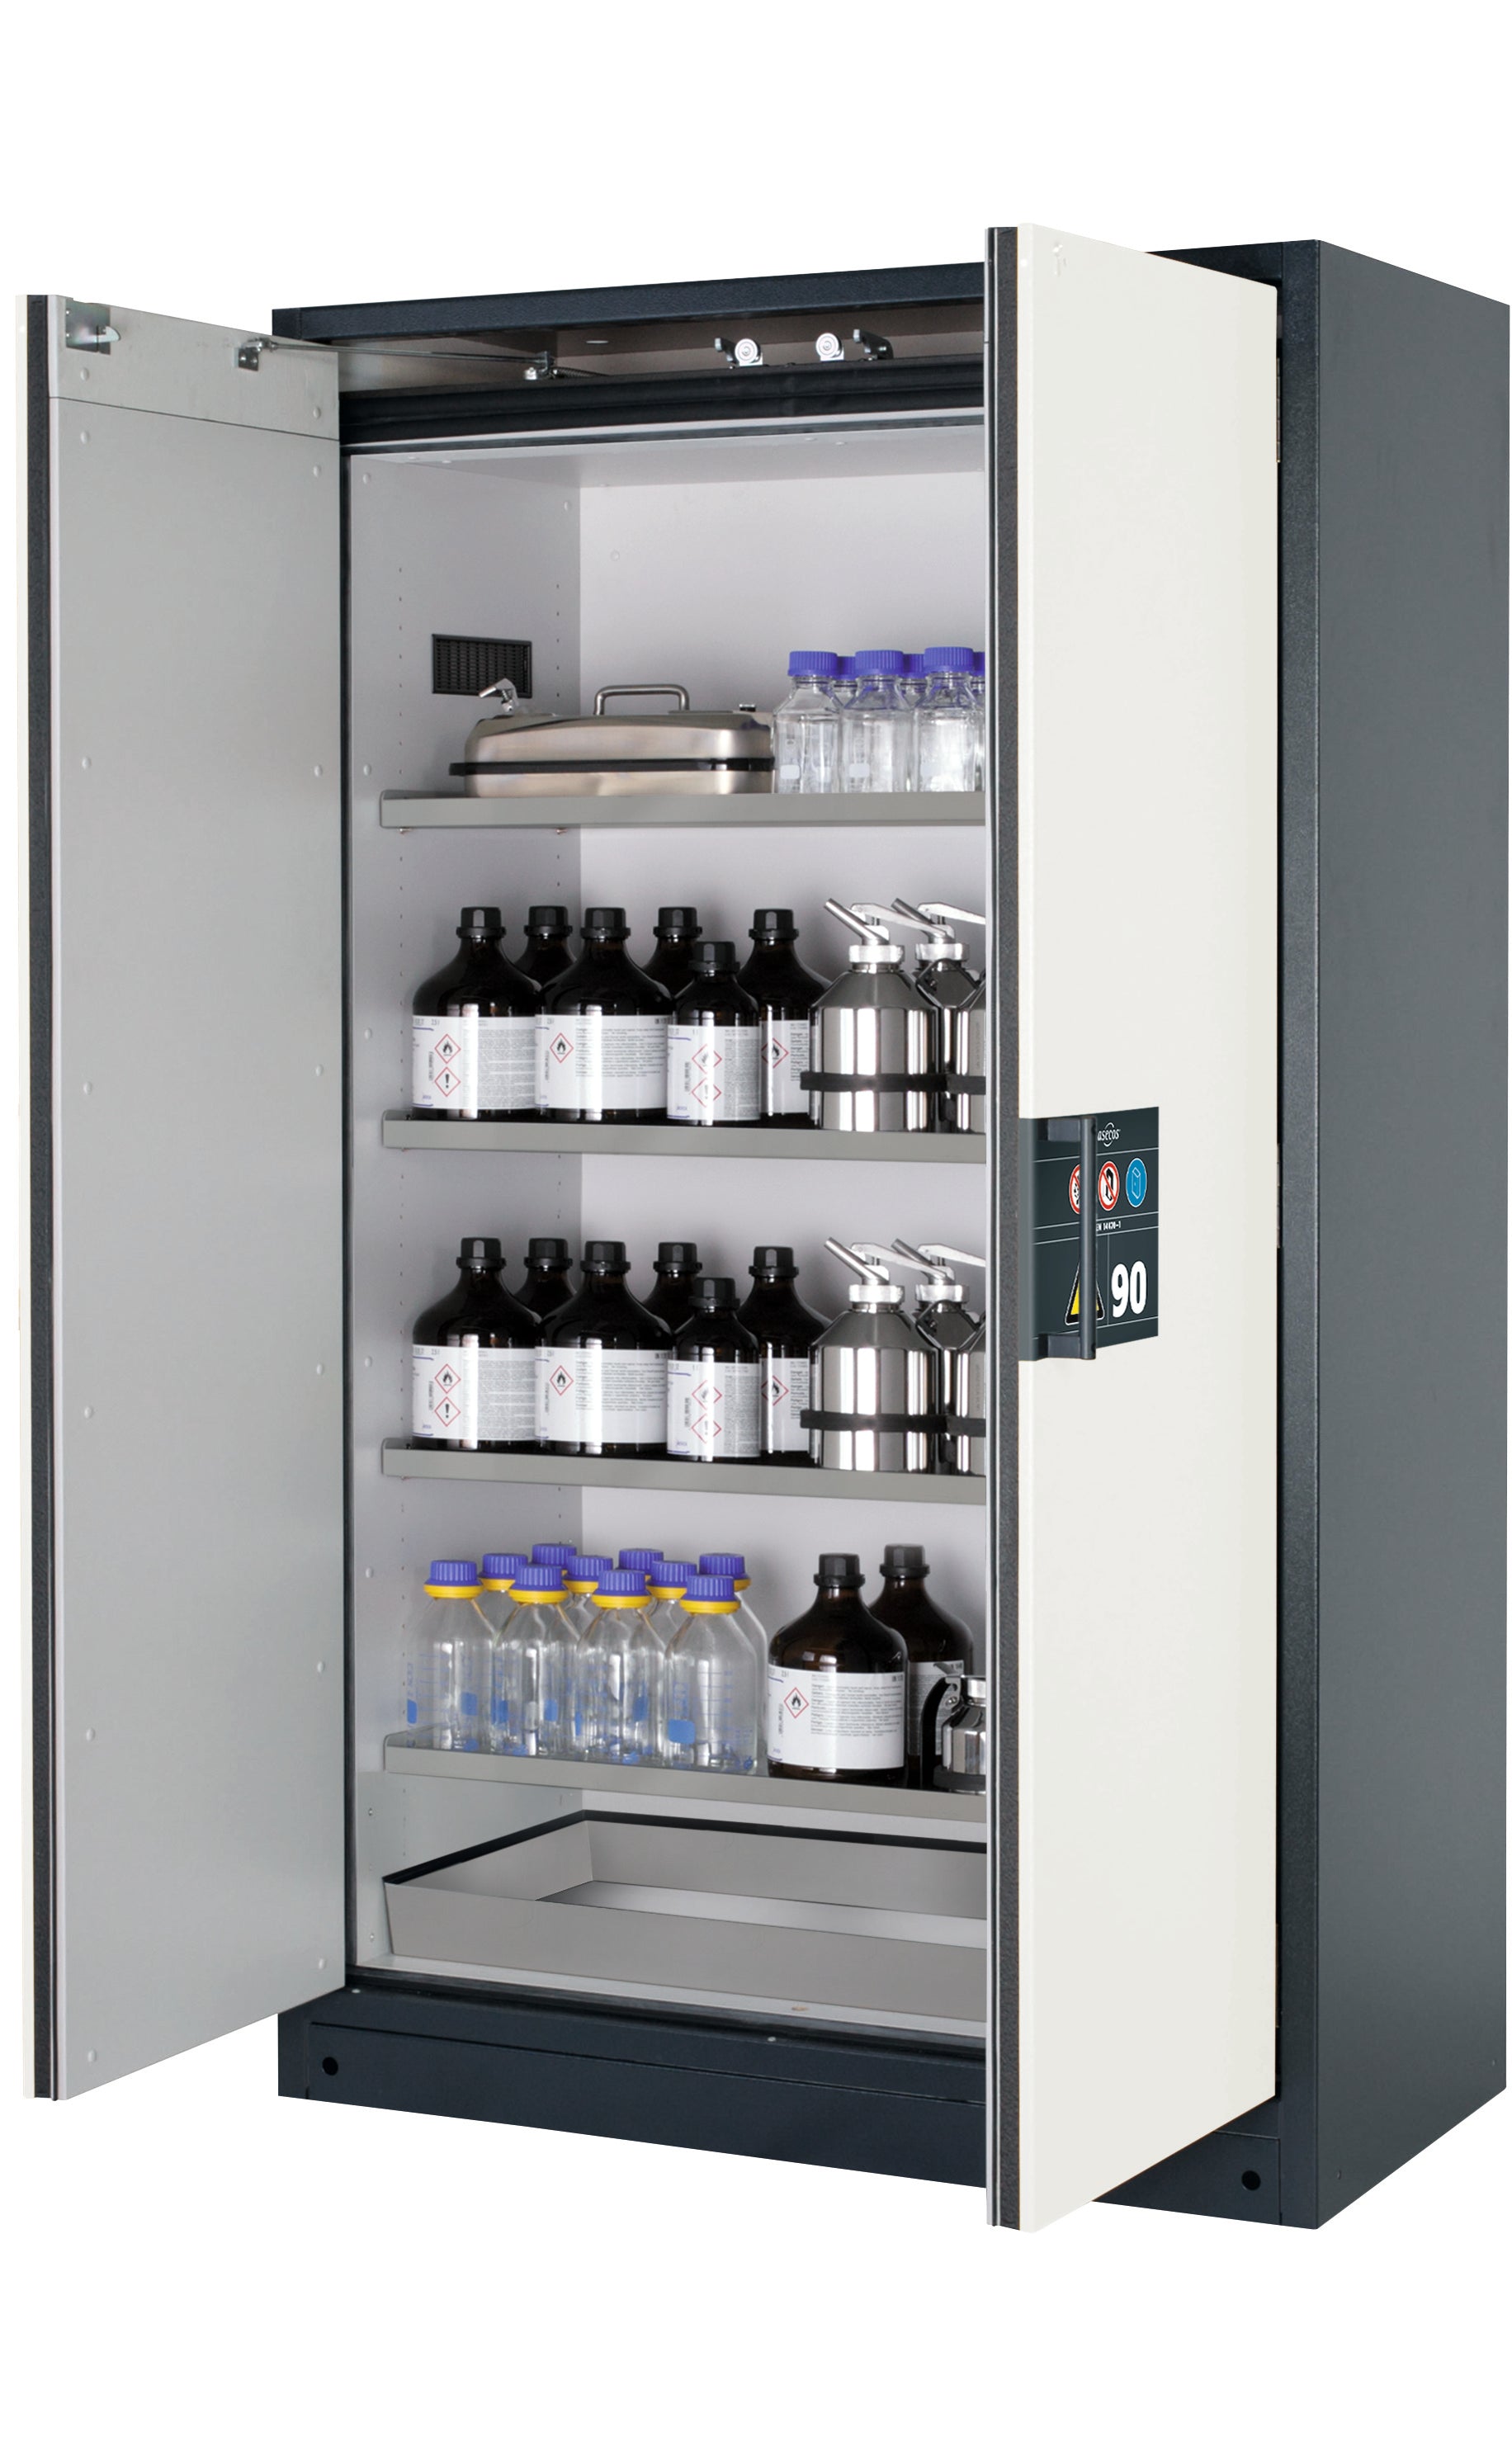 Type 90 safety storage cabinet Q-CLASSIC-90 model Q90.195.120 in pure white RAL 9010 with 4x shelf standard (stainless steel 1.4301),